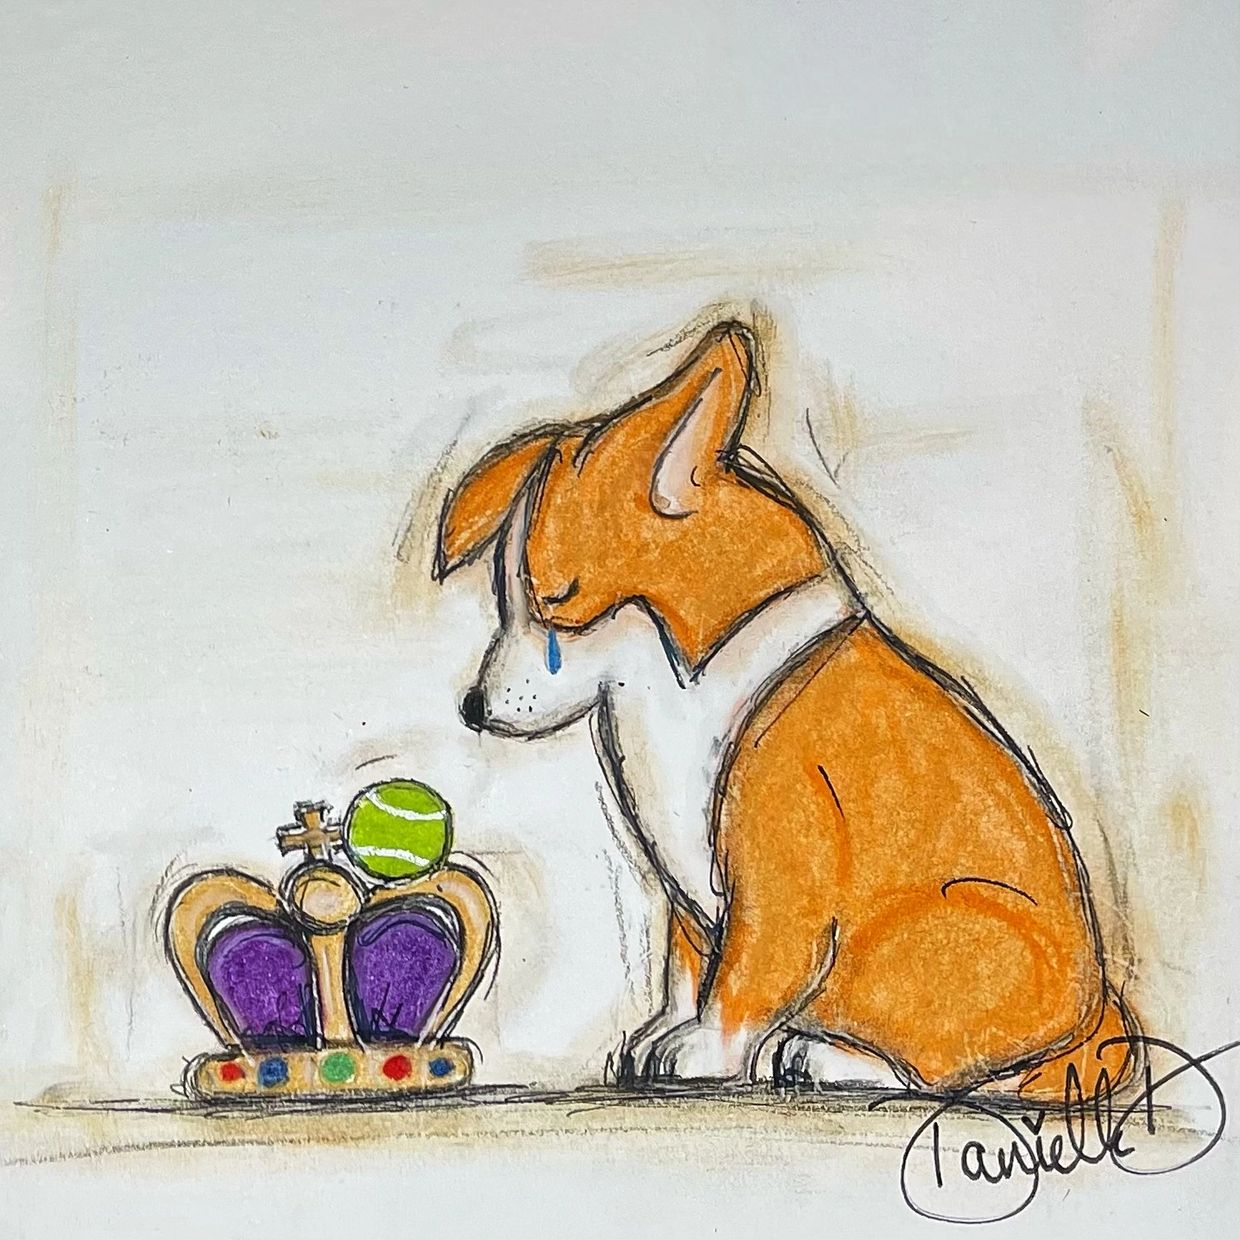 Crying corgi with crown and tennis ball by Danielle D 